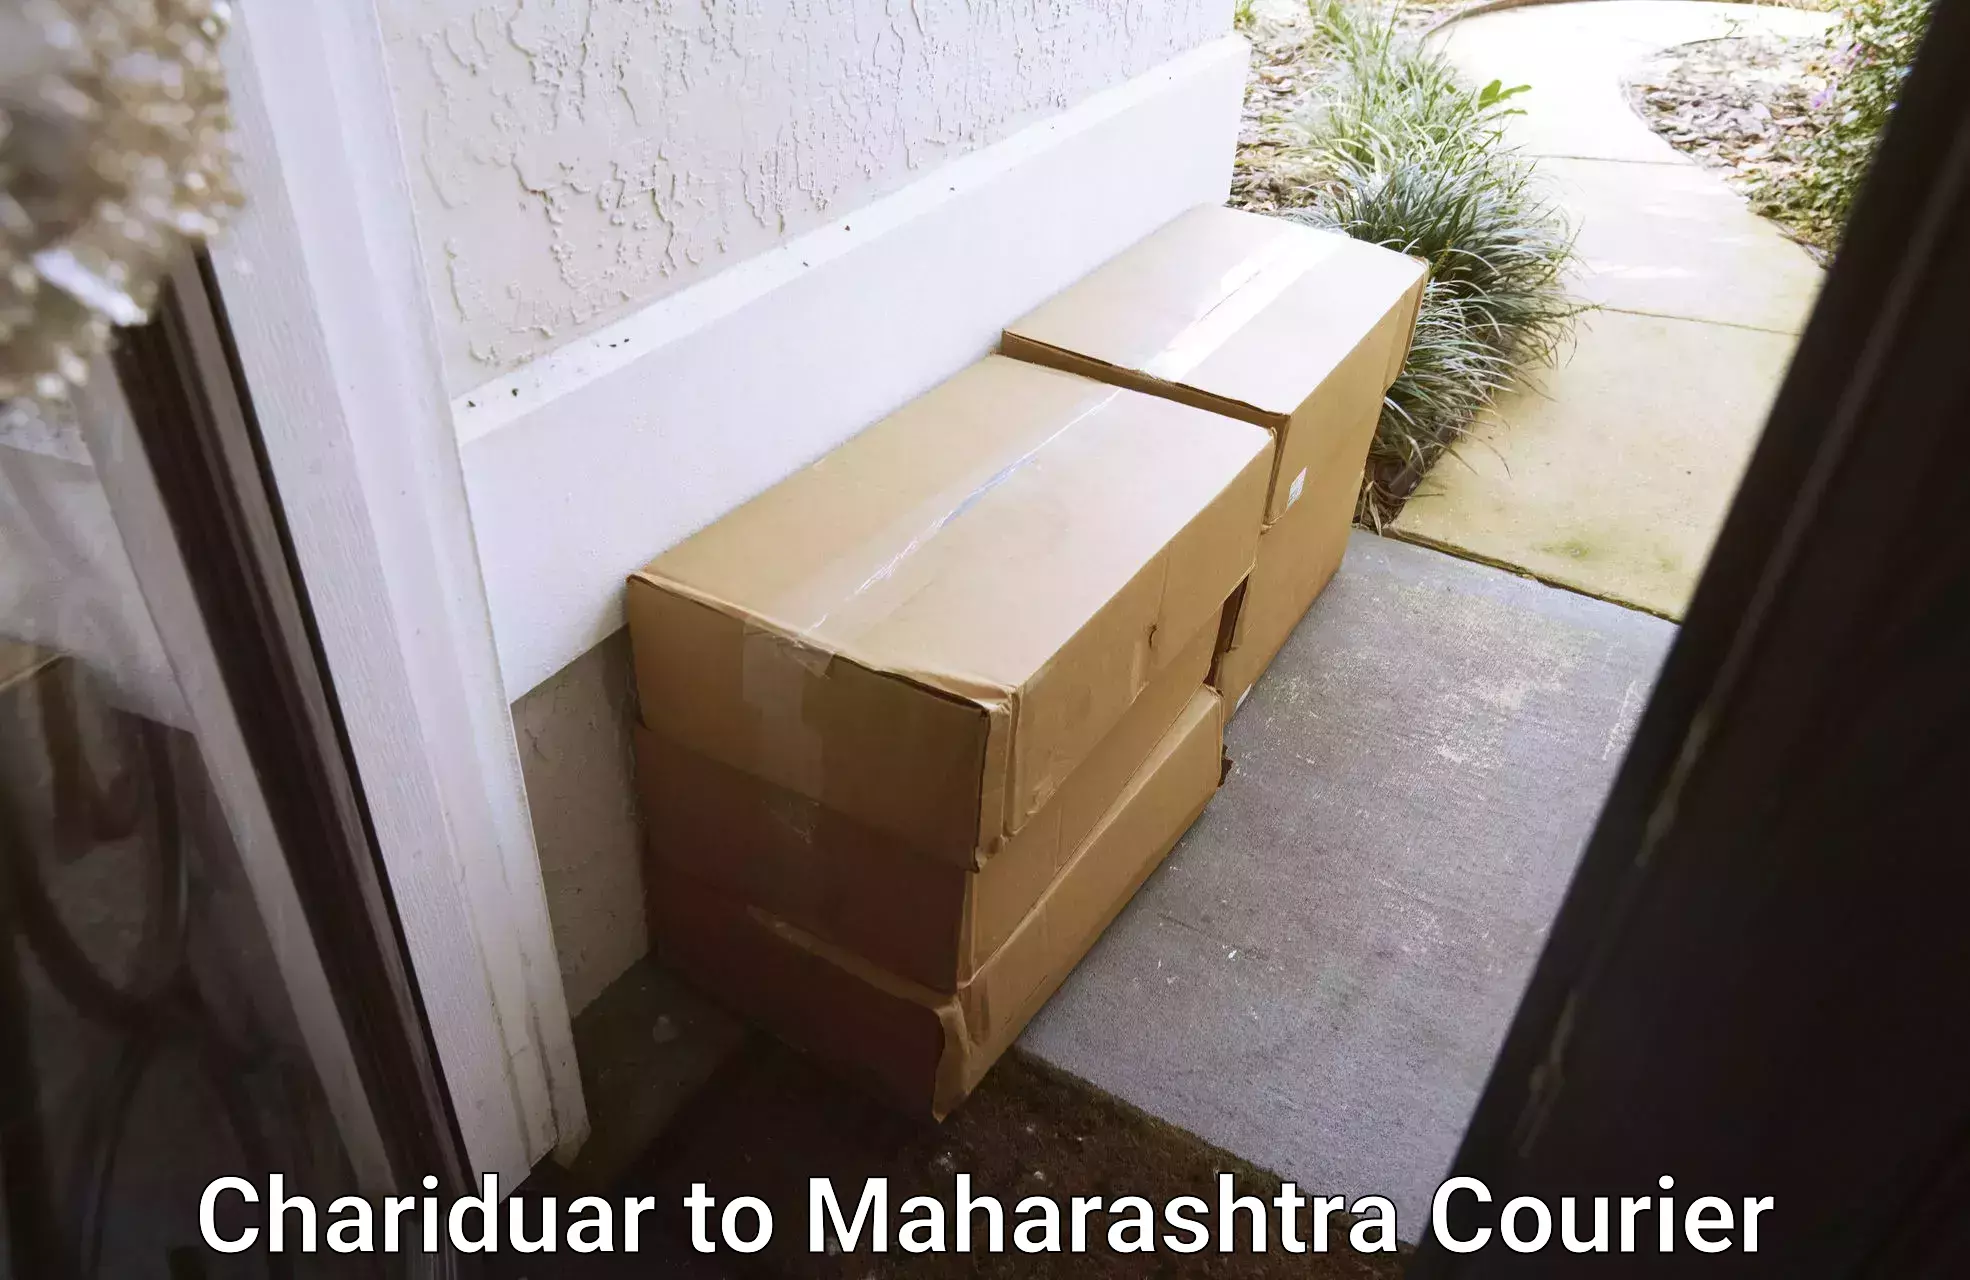 Full-service courier options in Chariduar to Mahim